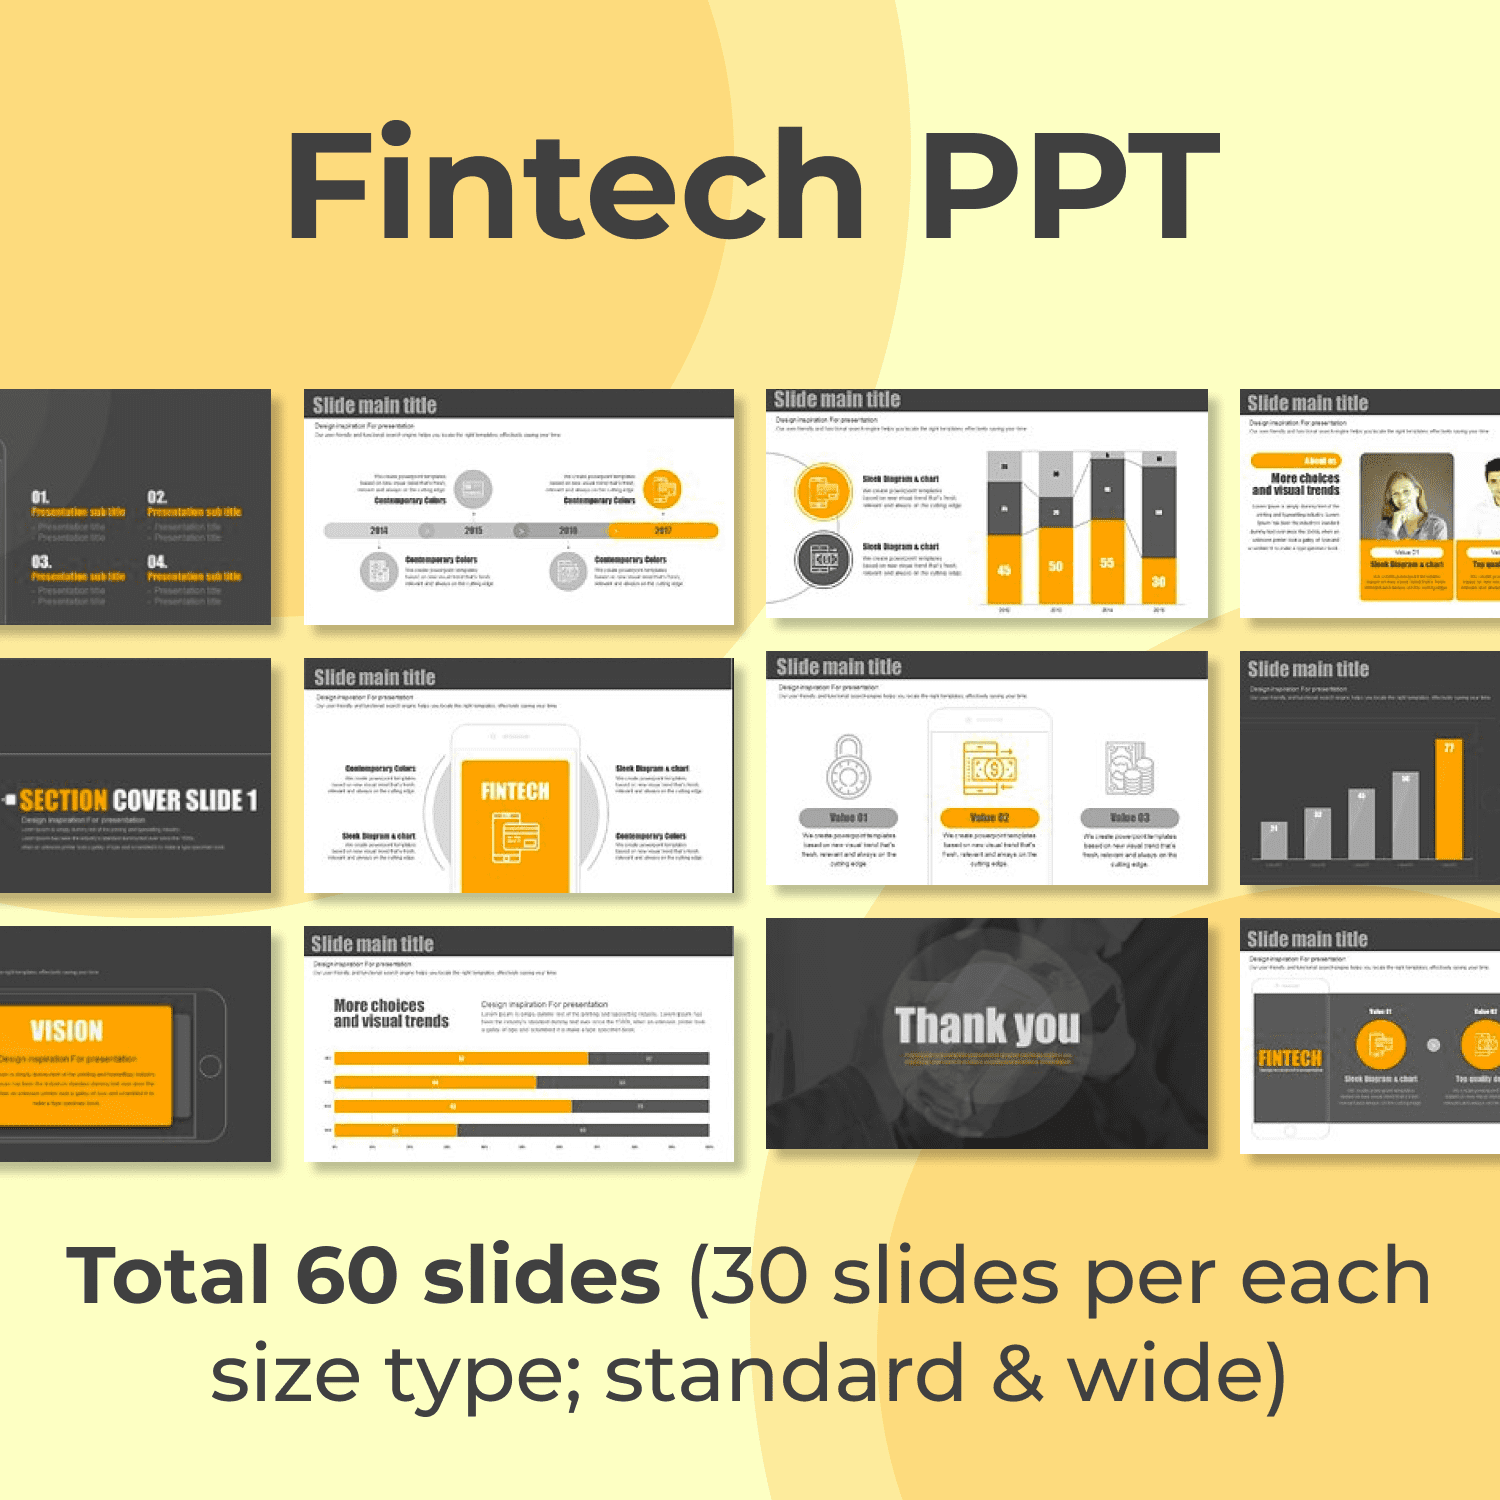 Fintech PPT cover image.